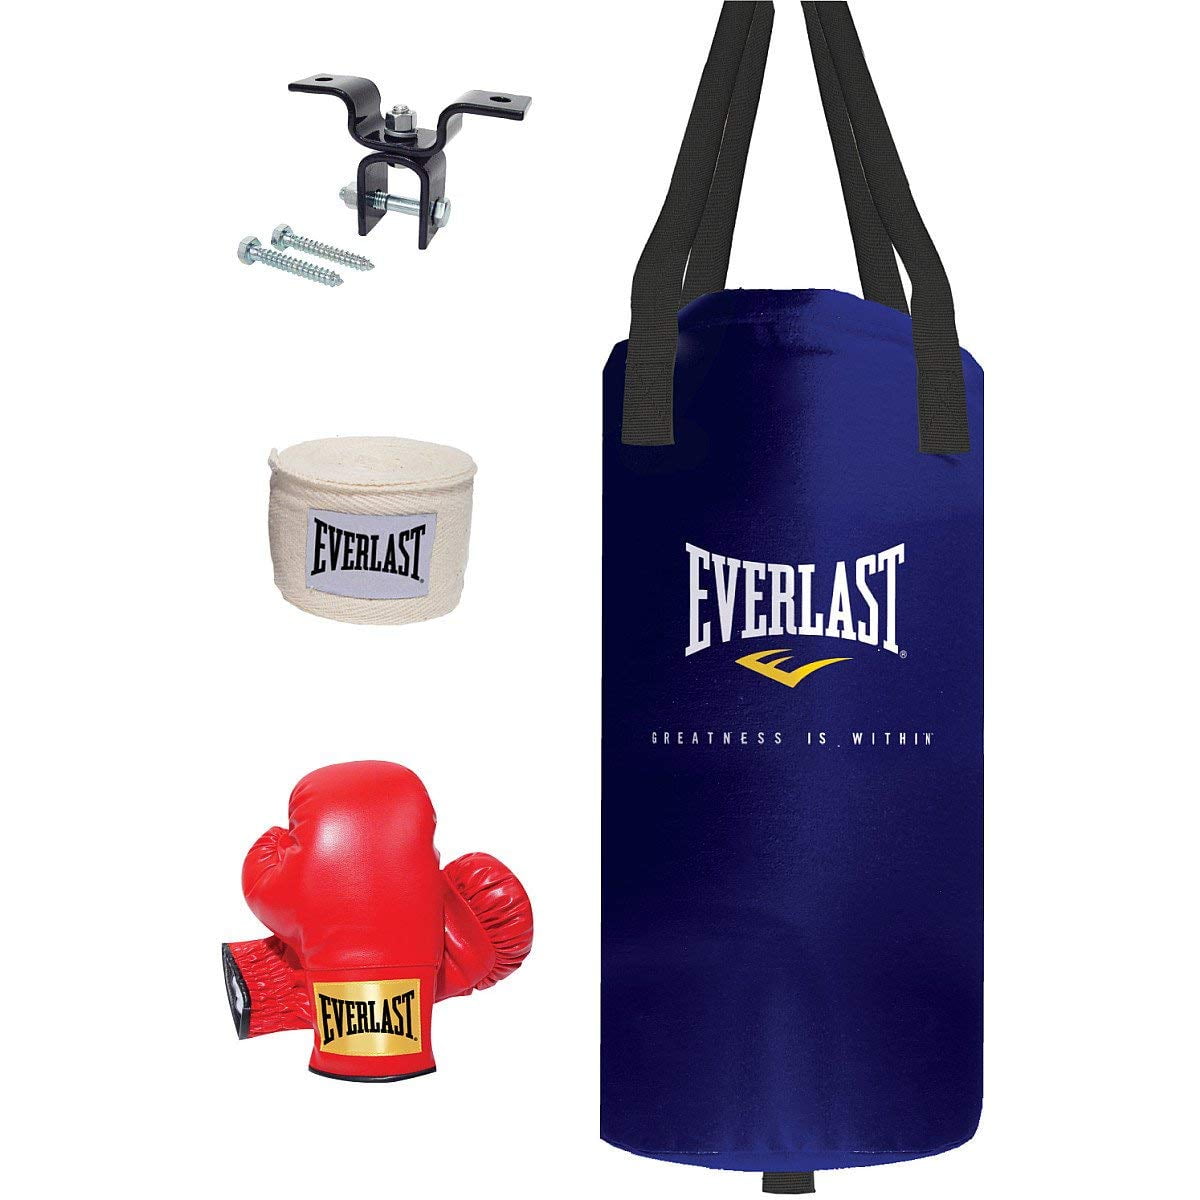 25lb Heavy Bag Kit, Black Nevatear heavy bag stuffed with a custom filling of natural and ...